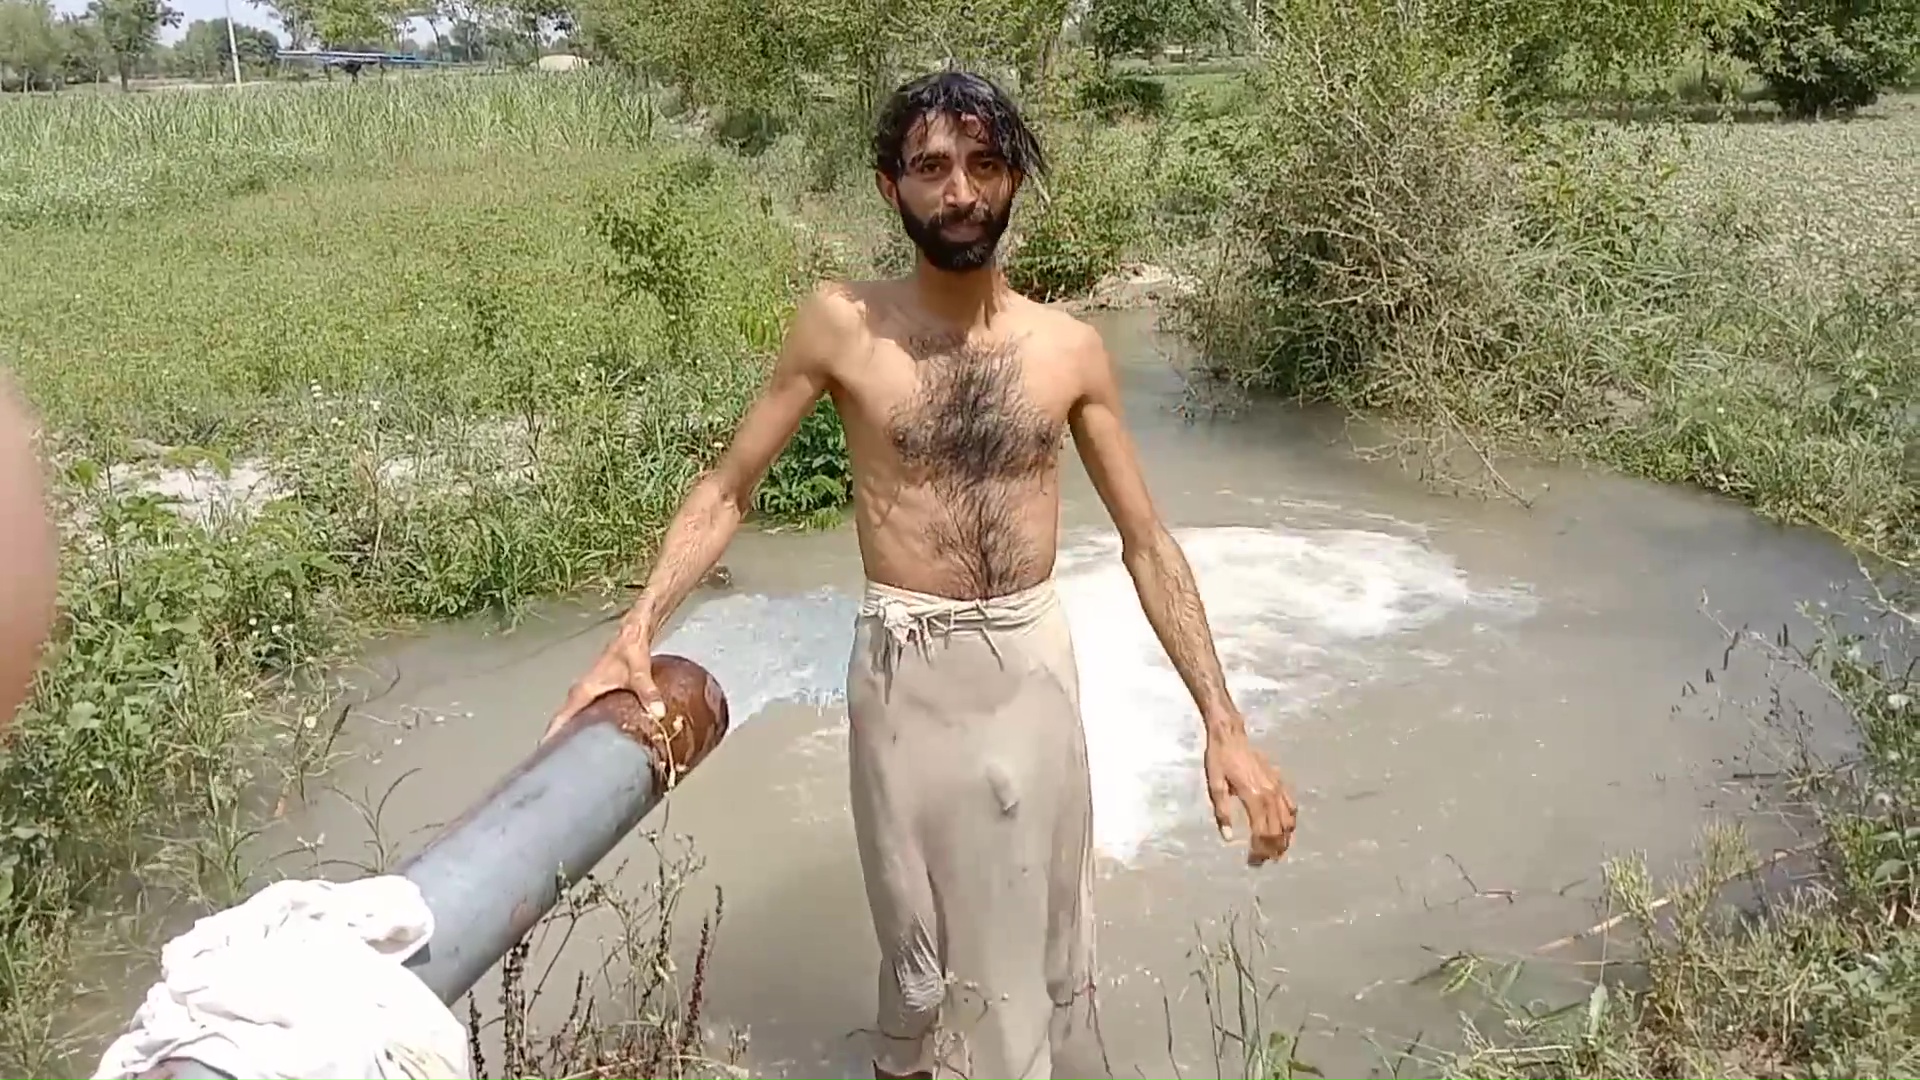 Big cock hairy paki boy barely clothed in water